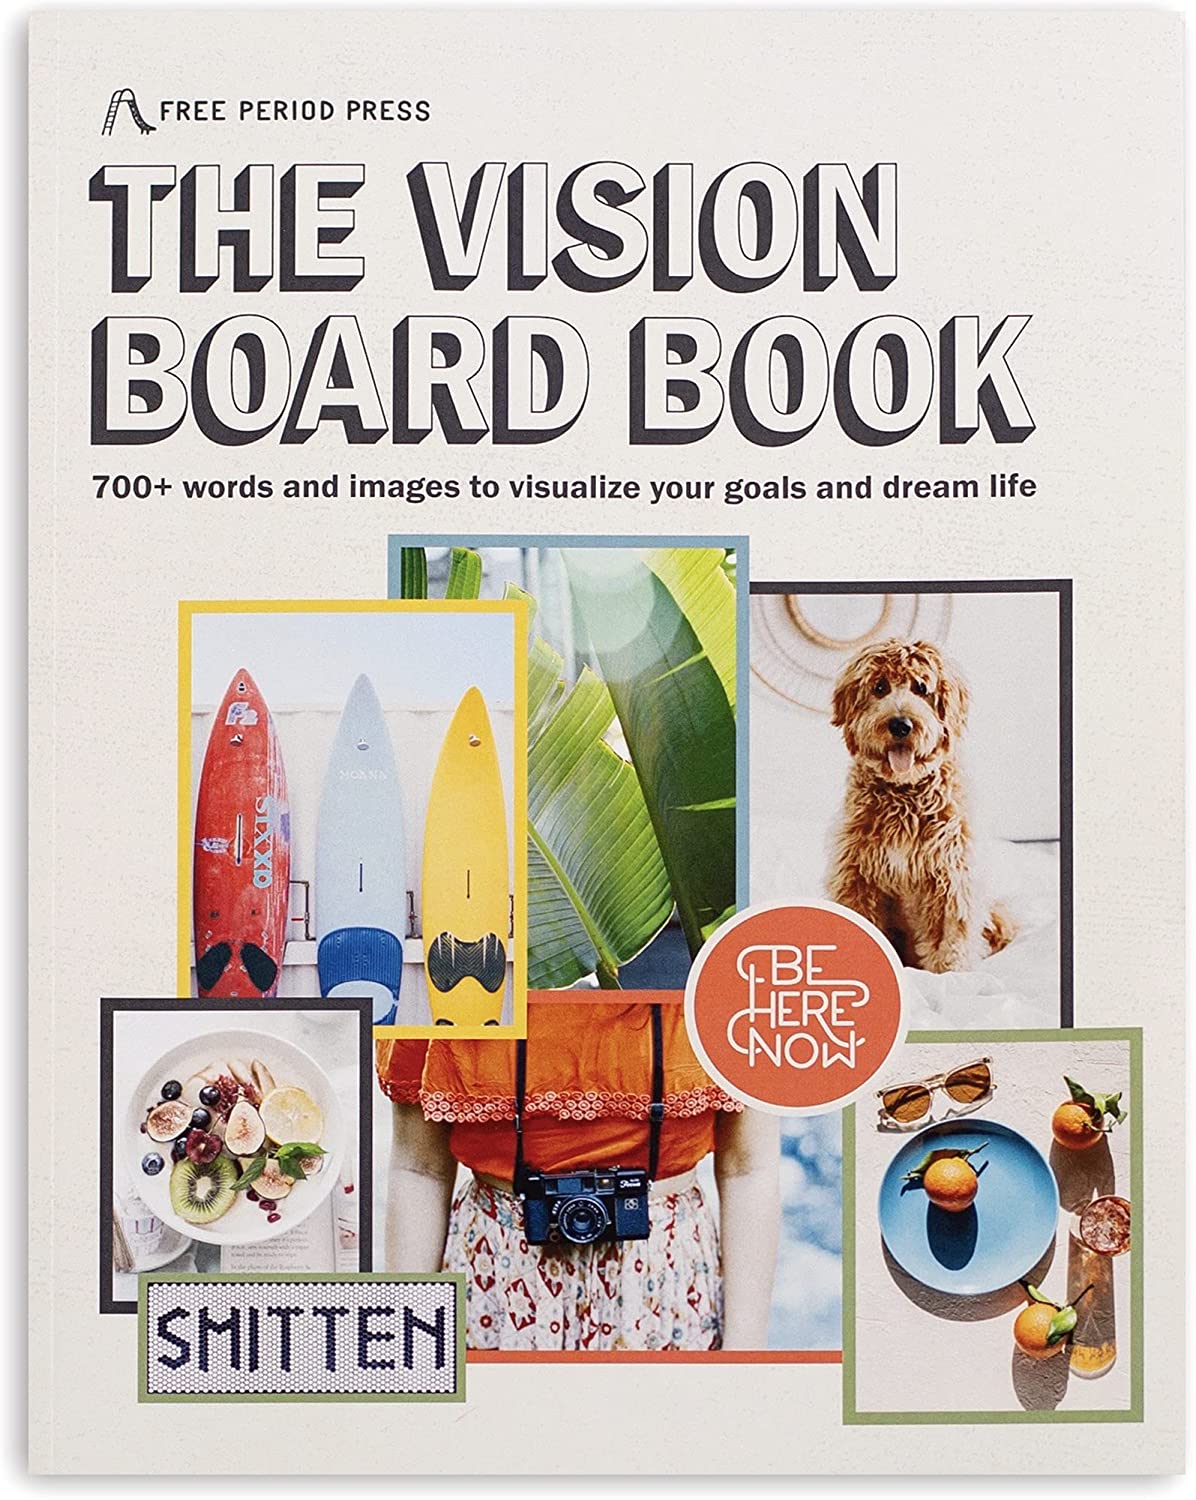 Vision Board Kit for Women - Complete Deluxe Dream & Mood Board